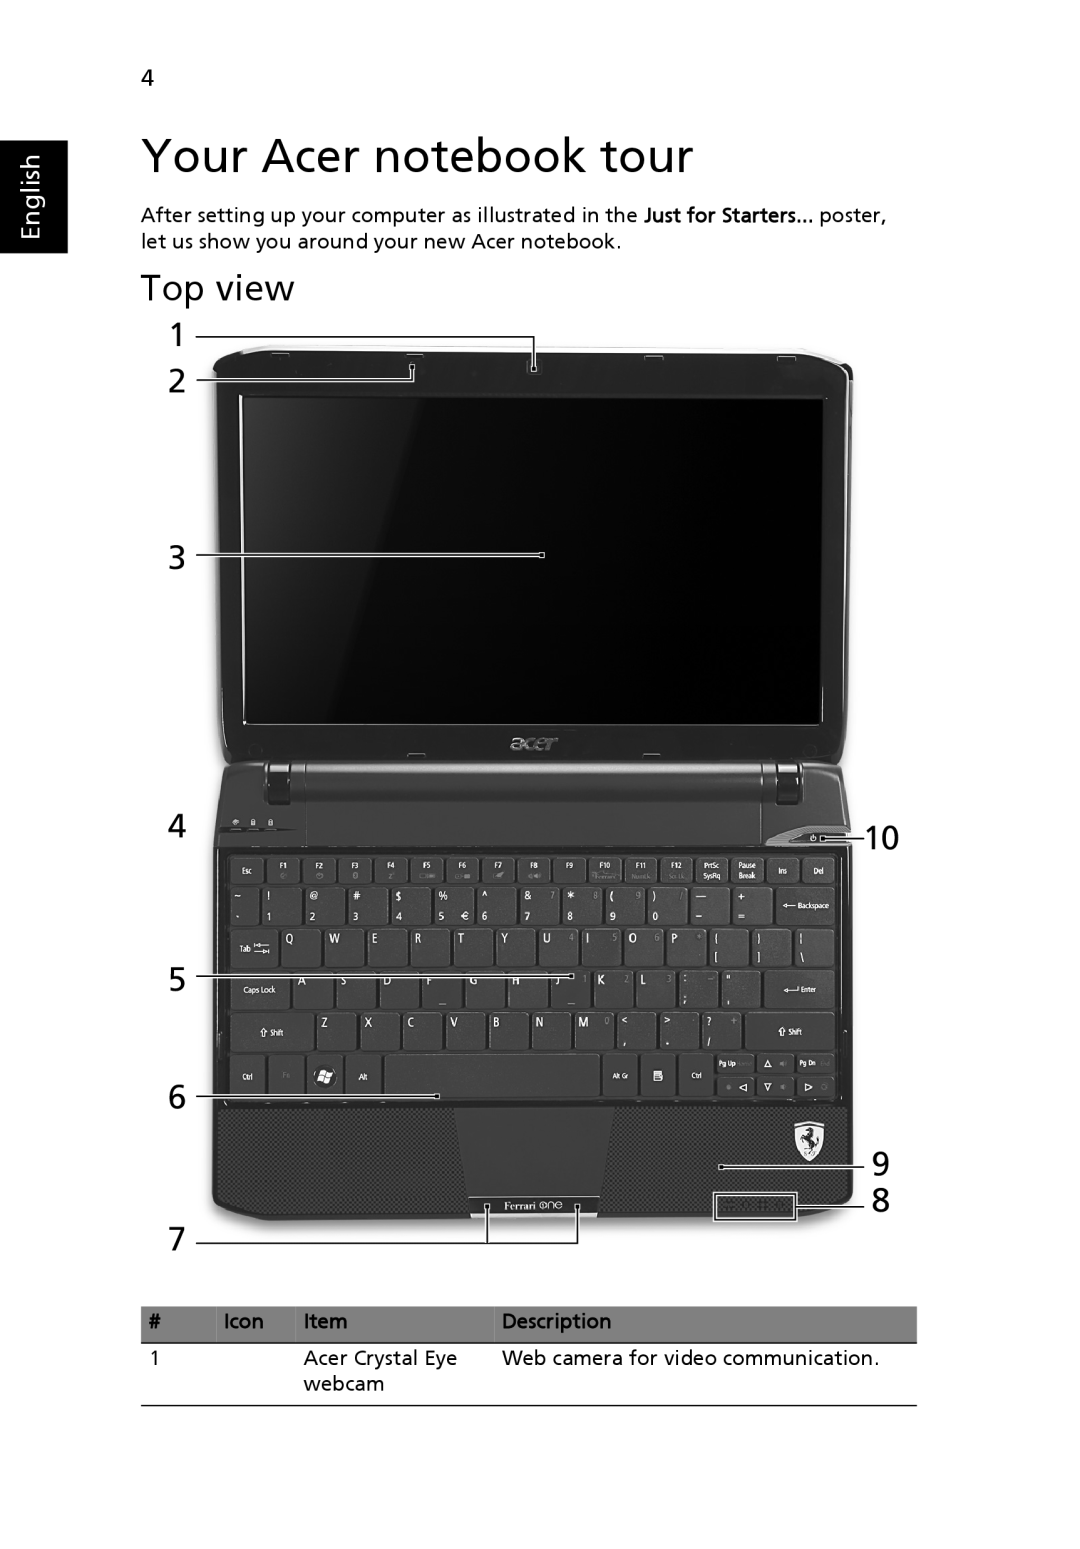 Acer 200 manual Your Acer notebook tour, Top view, English, Icon Item, Description 